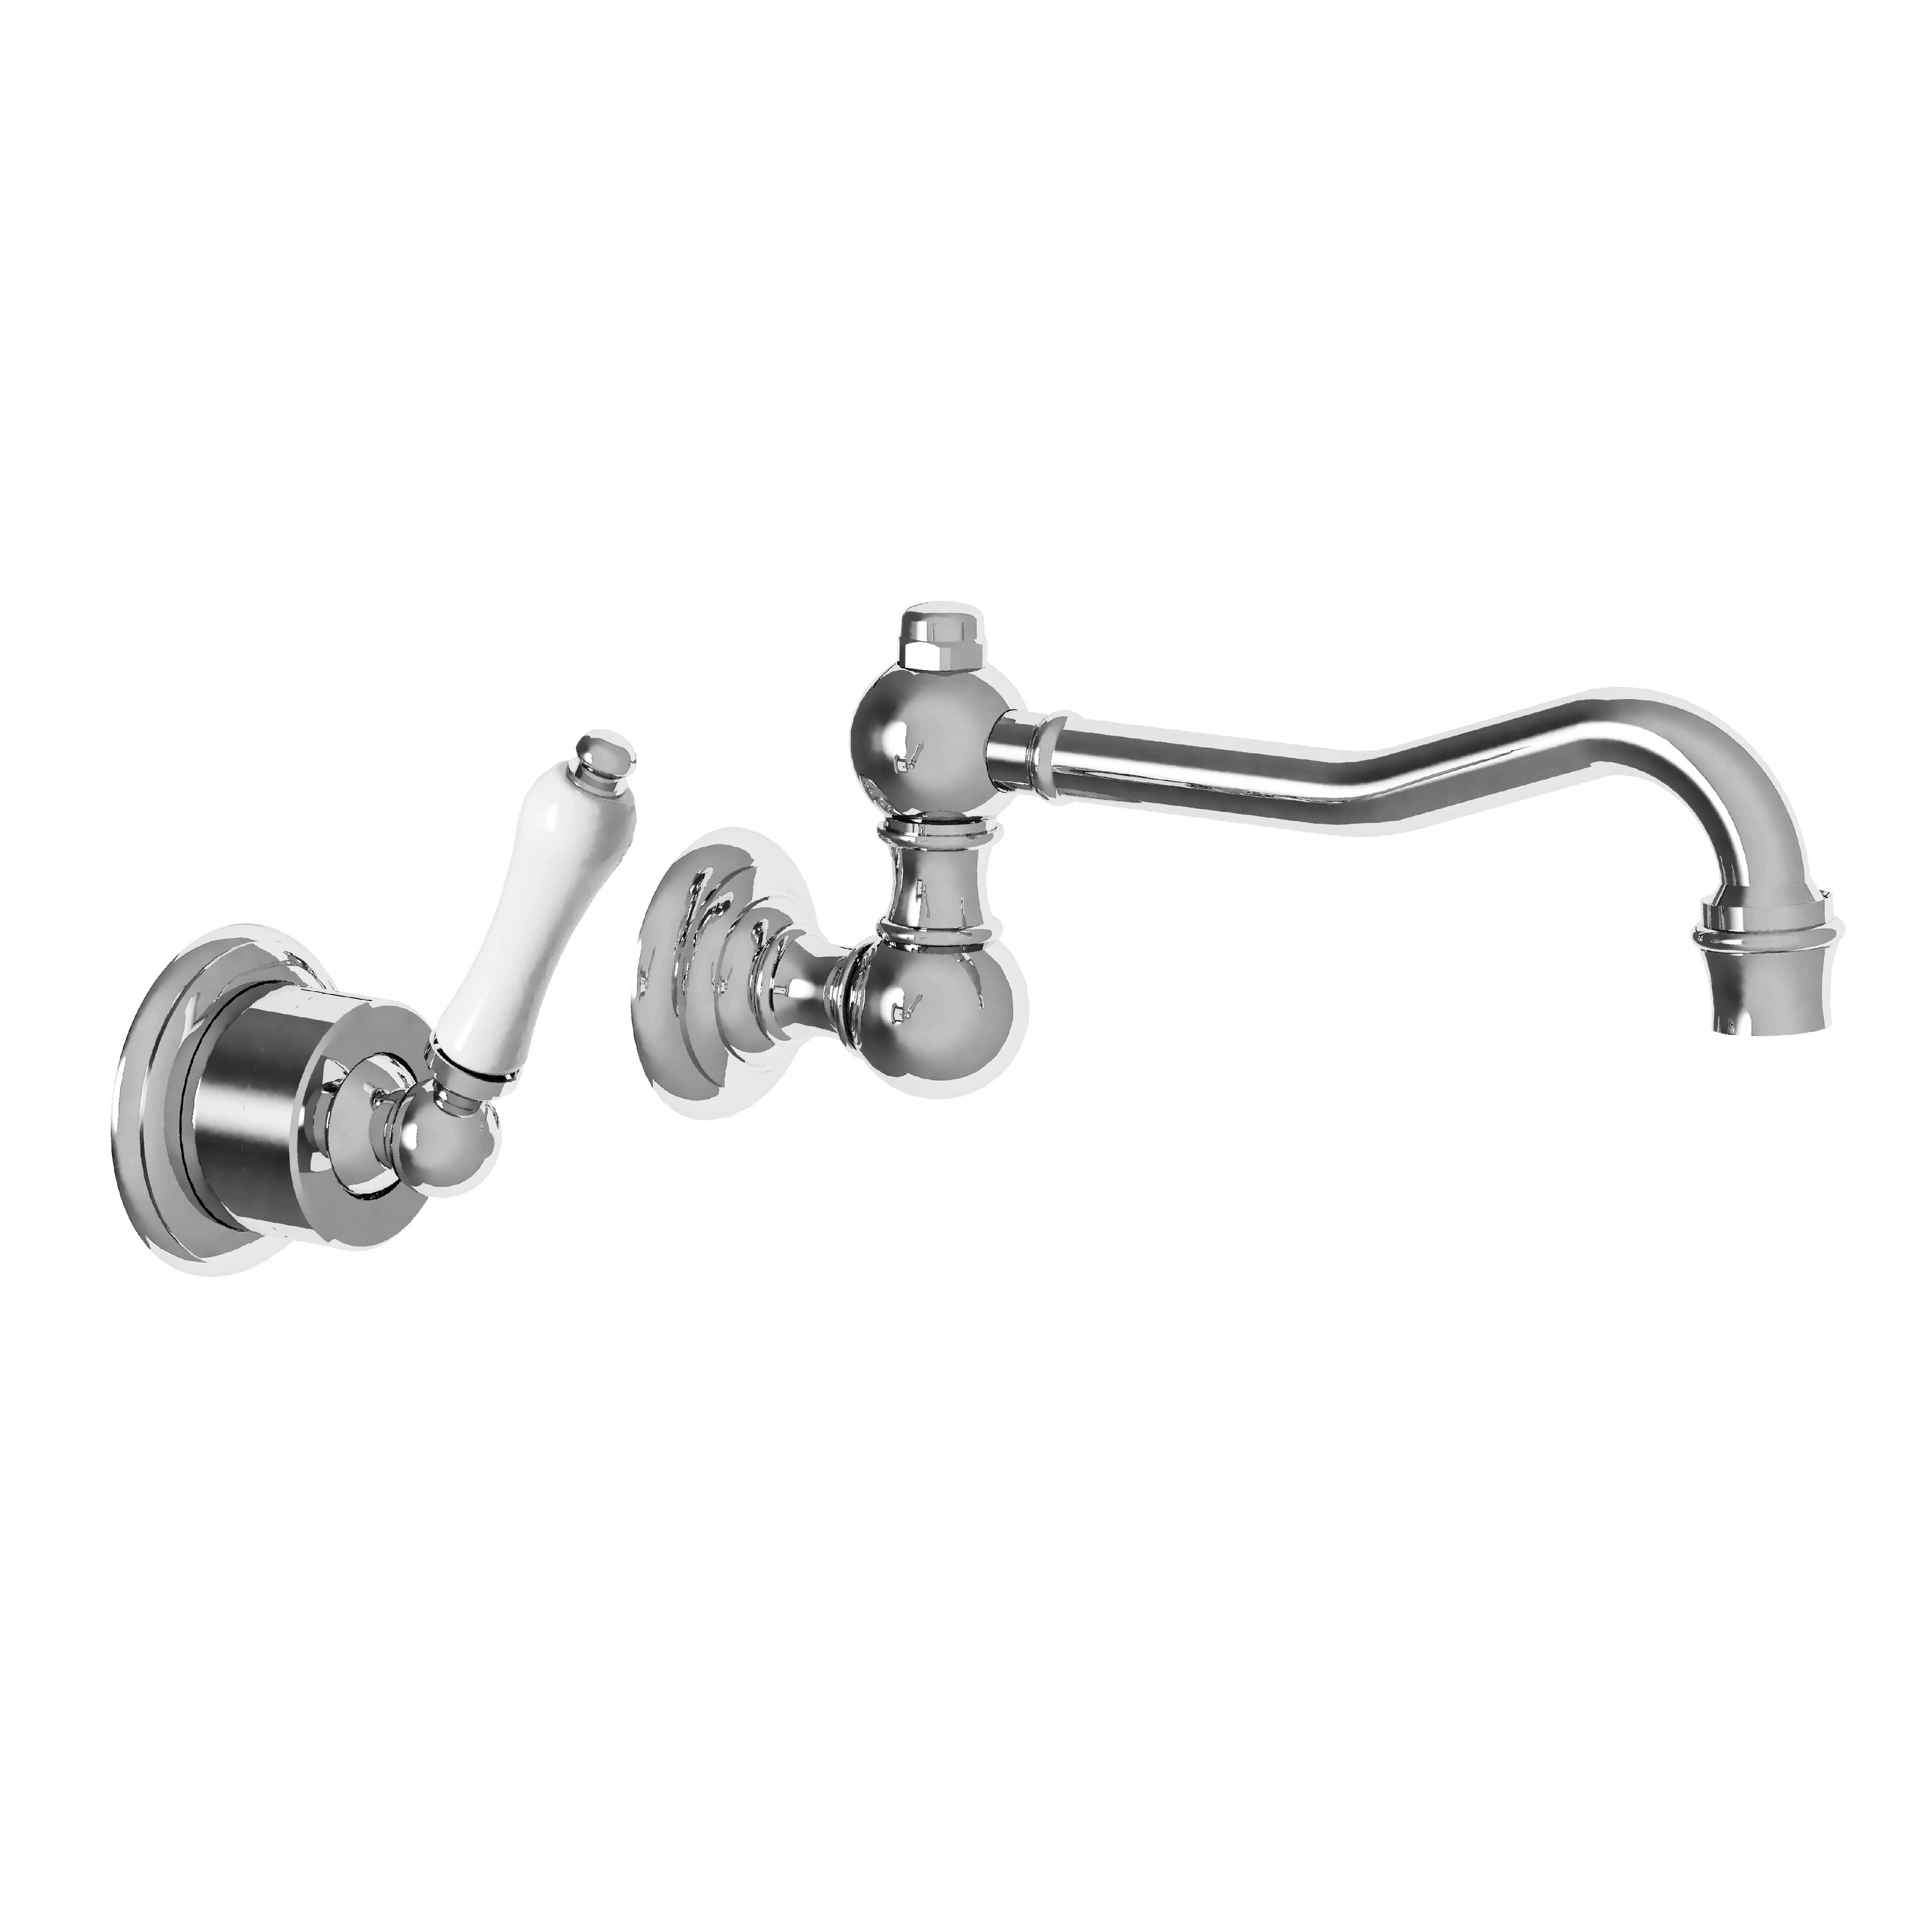 M04-1203M Wall mounted single lever basin mixer, built-in